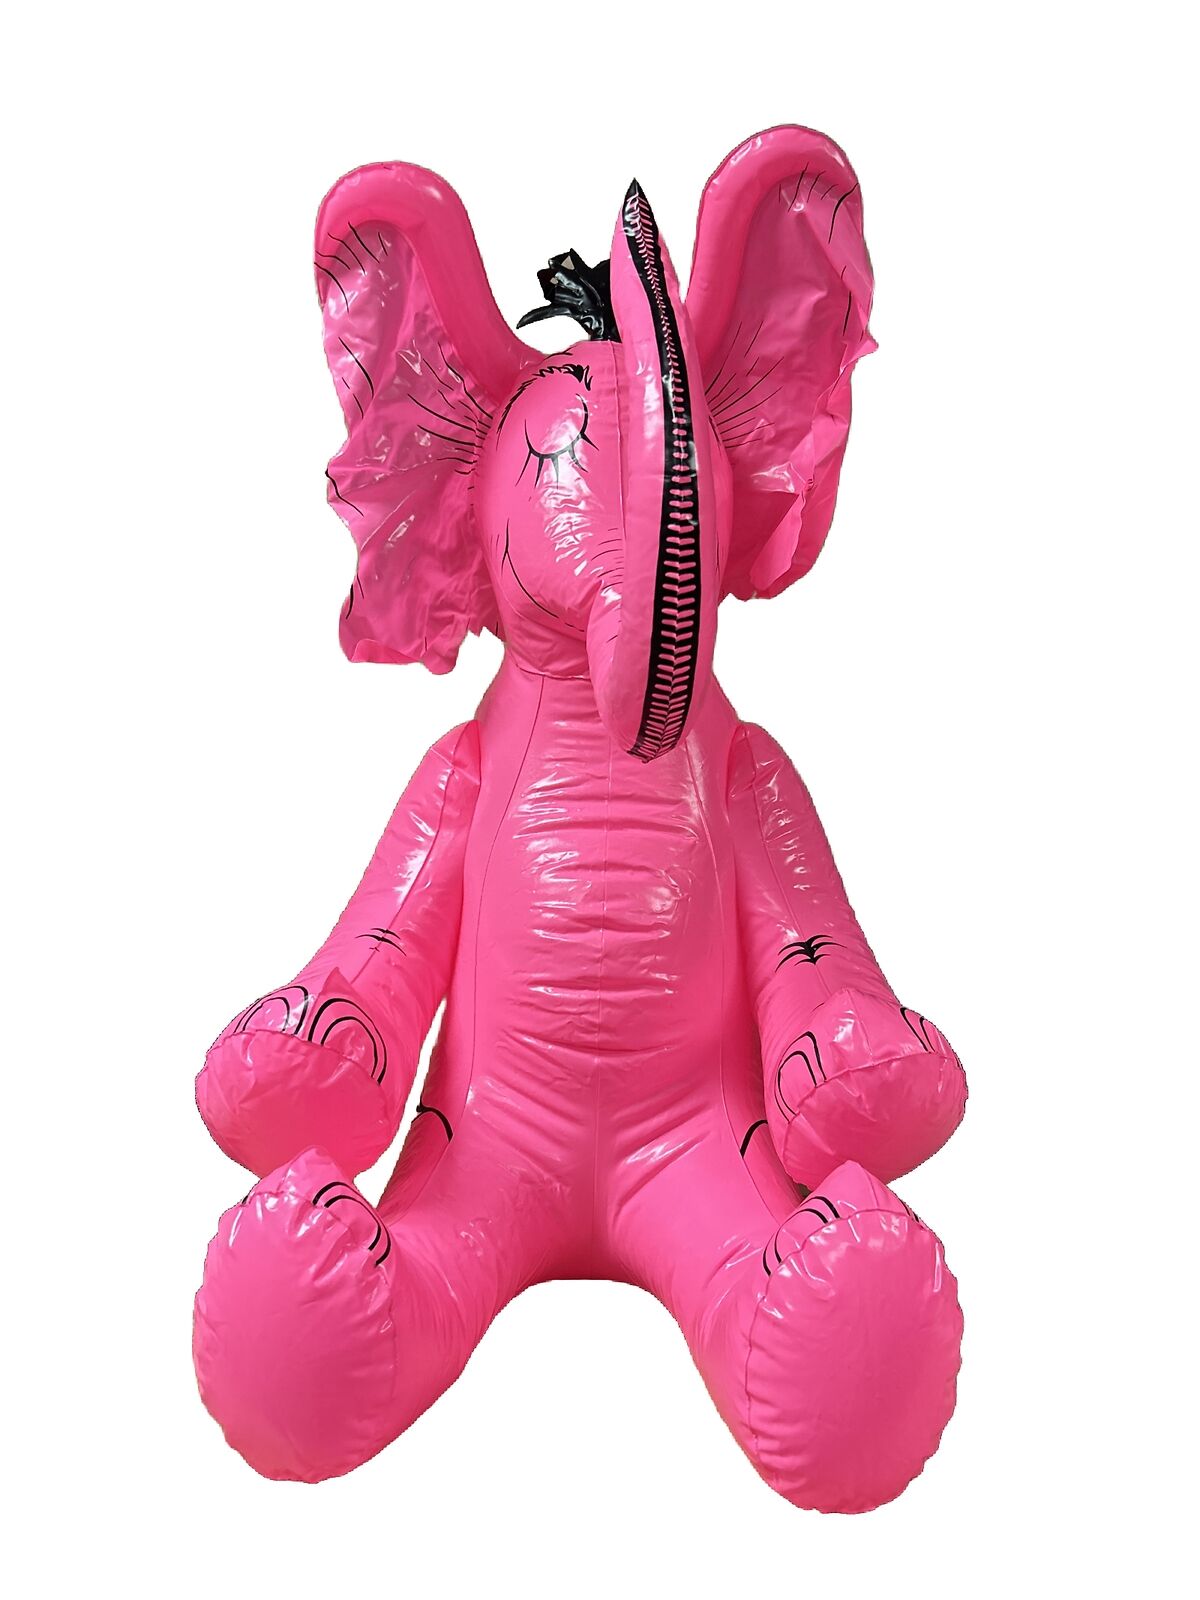 Extremely Rare Inflatable Horton The Elephant Dr Seuss